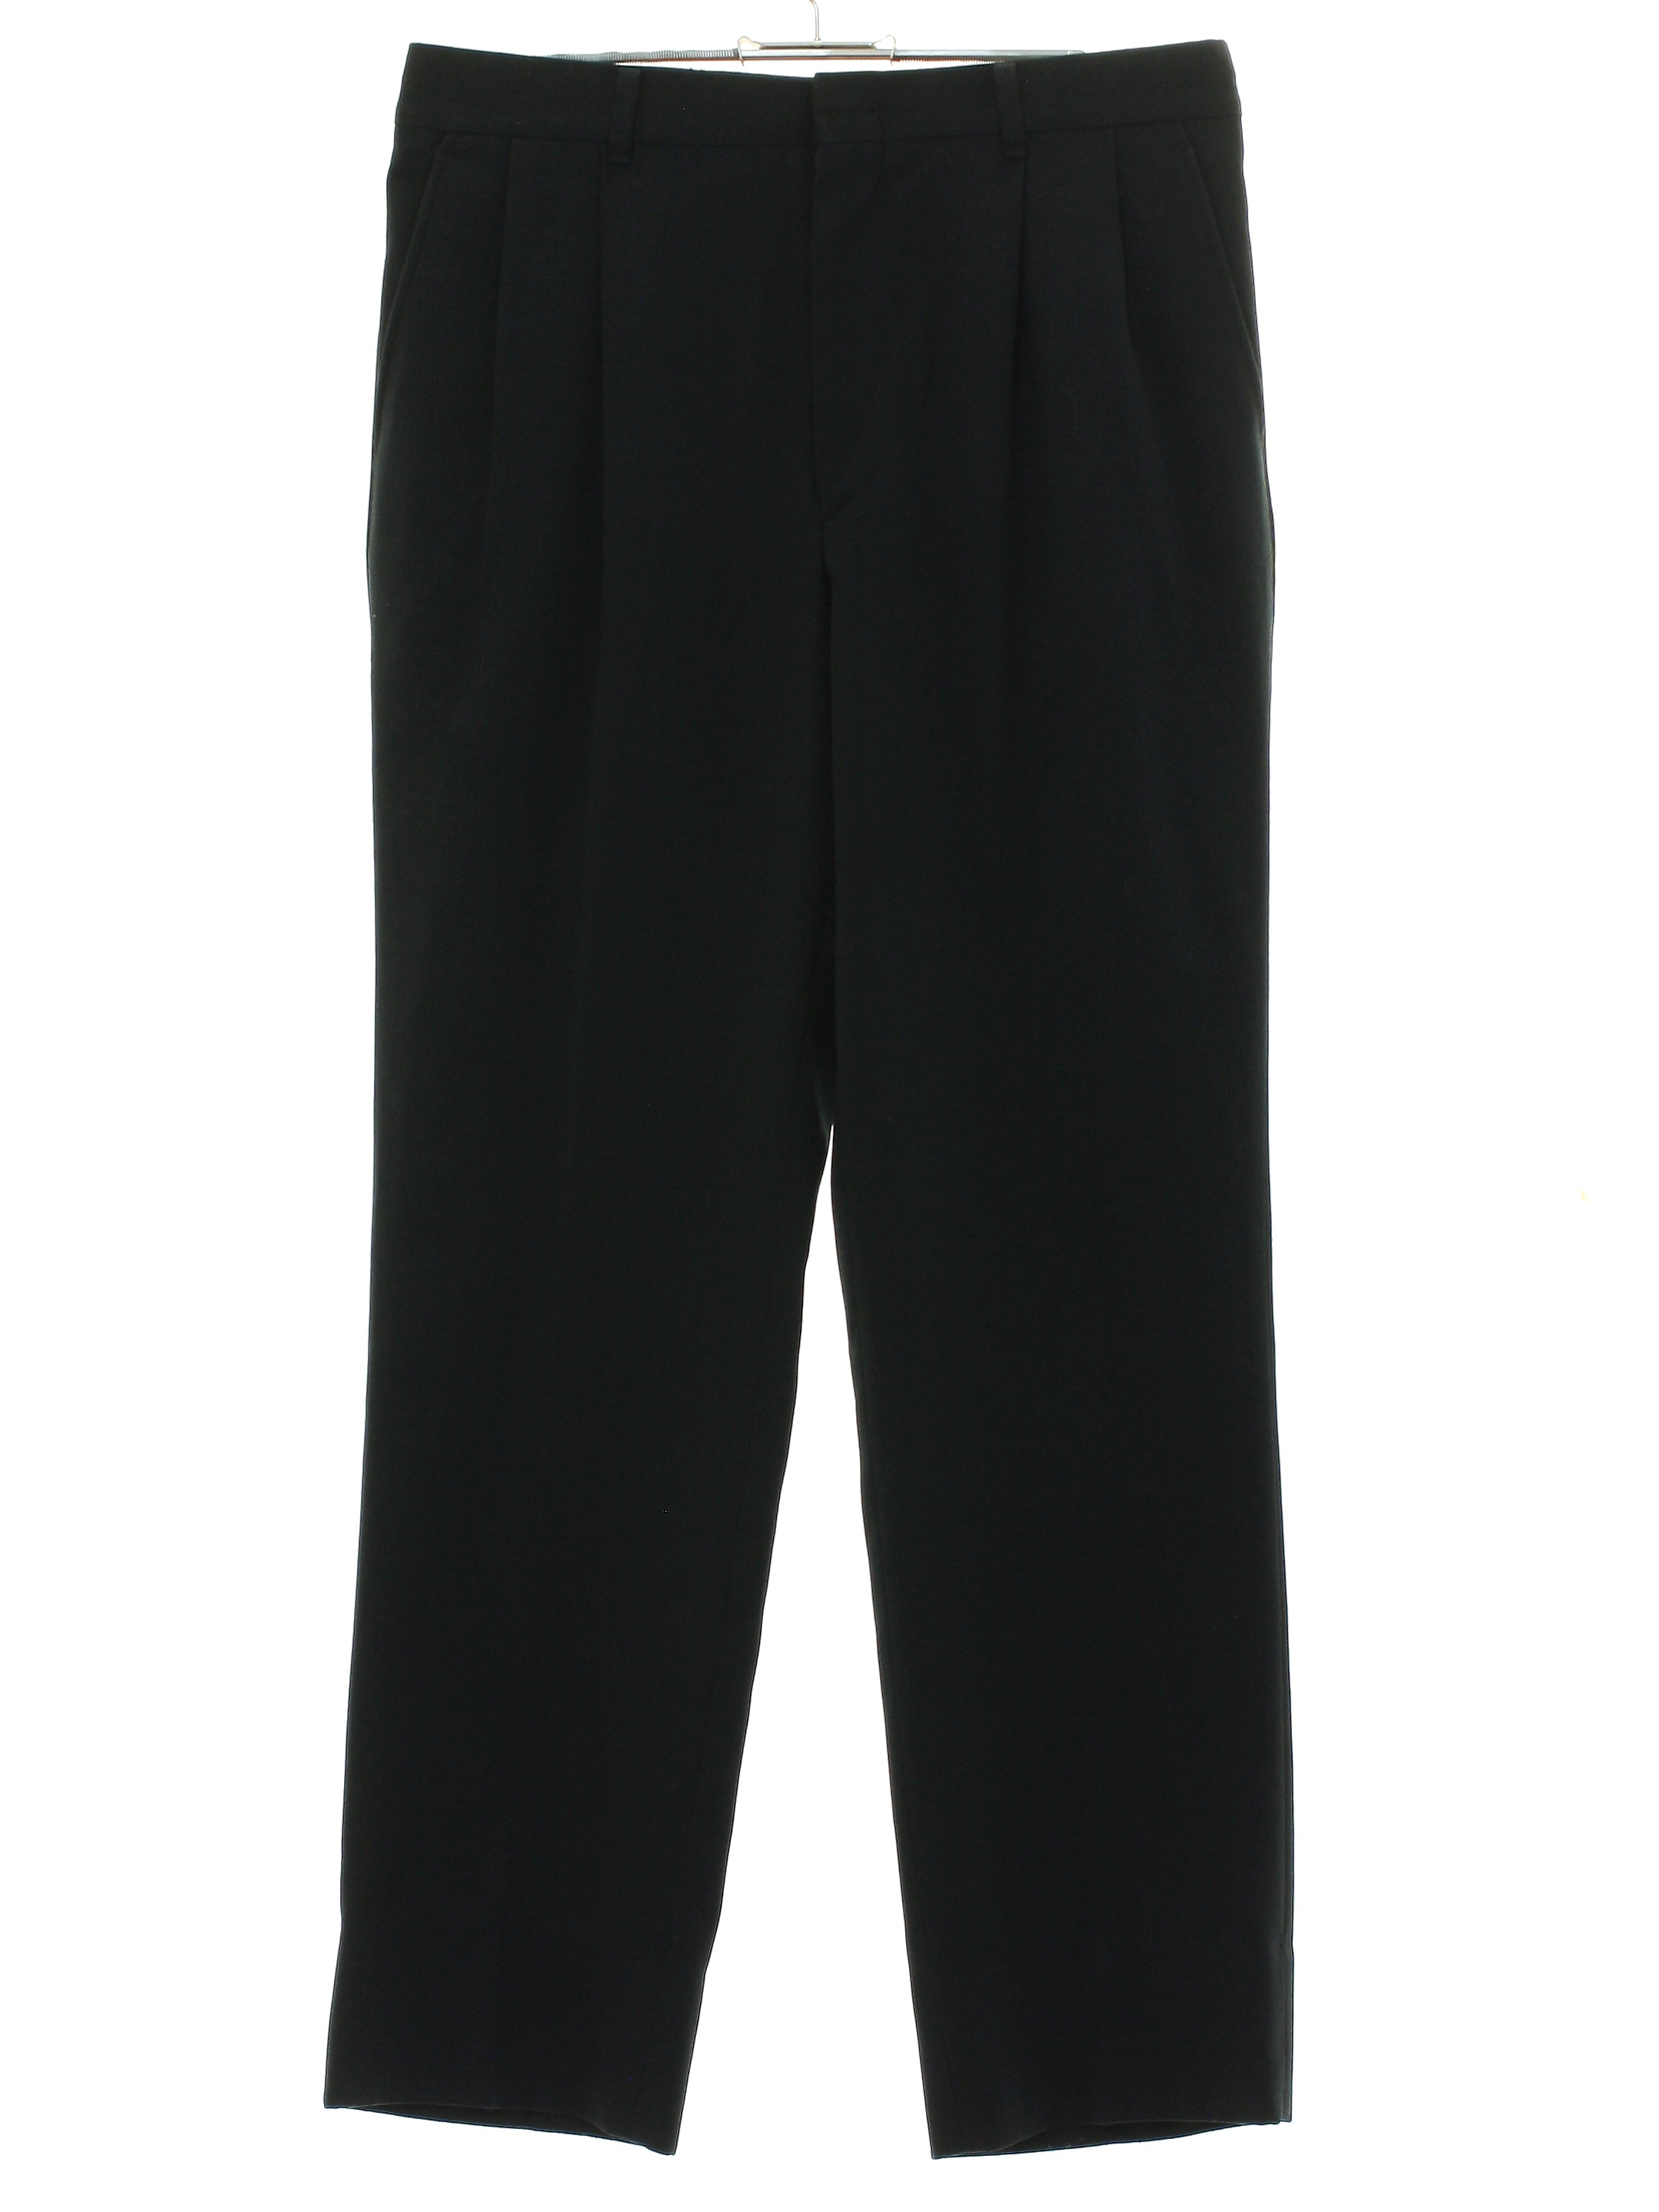 80s Retro Pants: 80s -Botany 500- Mens black solid colored wool ...